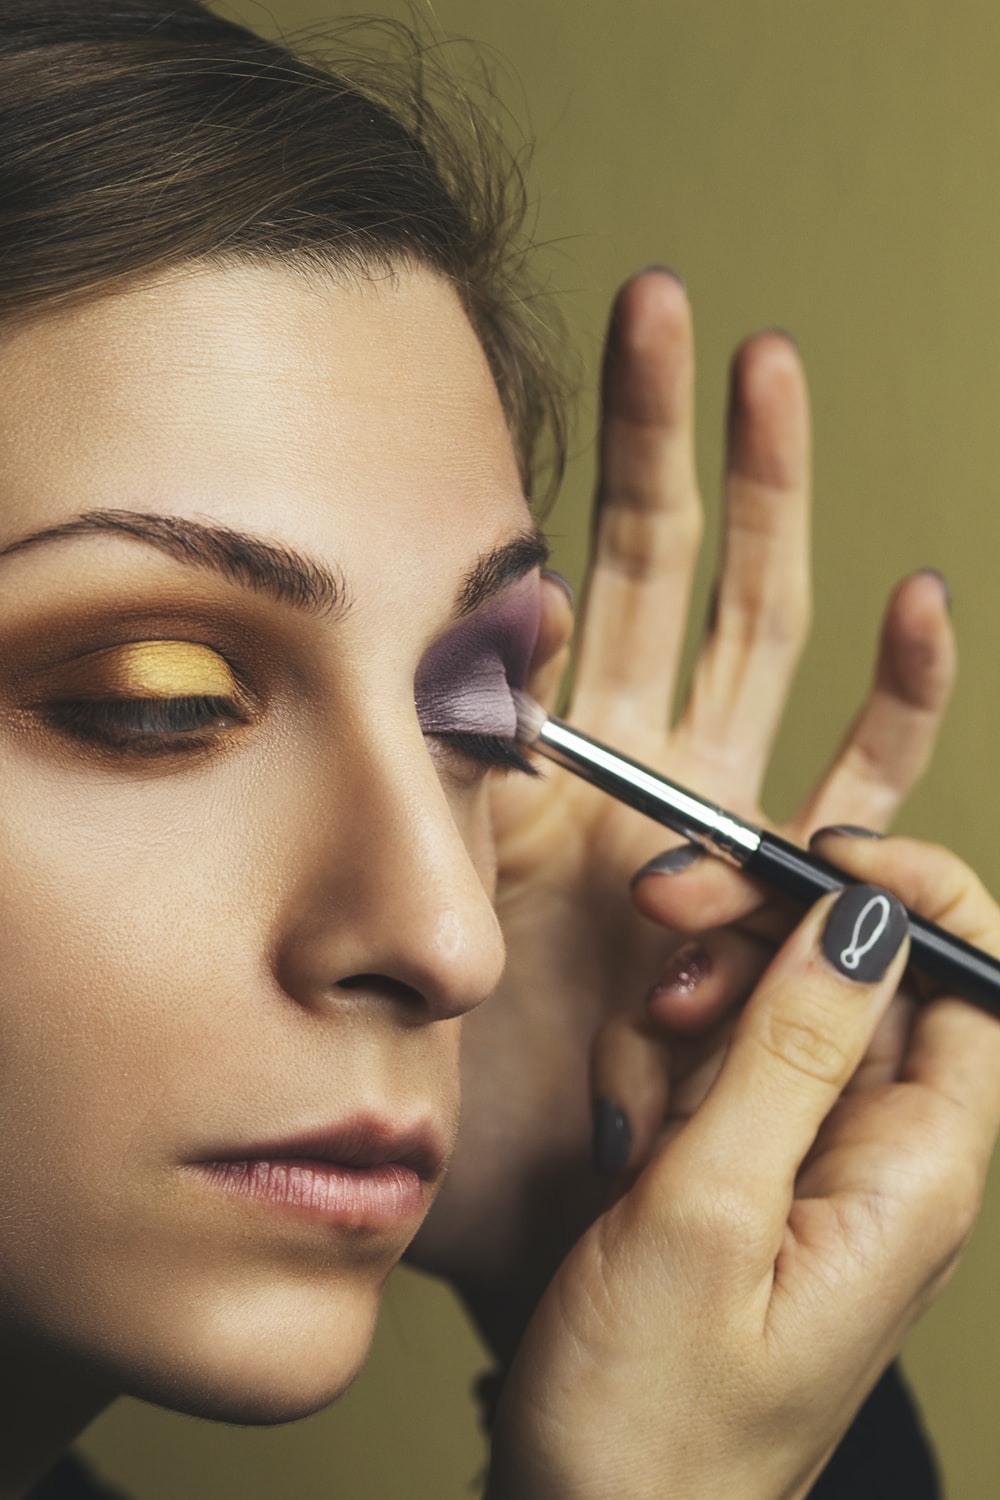 Contrasting-shades-1 Top 10 Outdated Beauty and Makeup Trends to Avoid in 2022